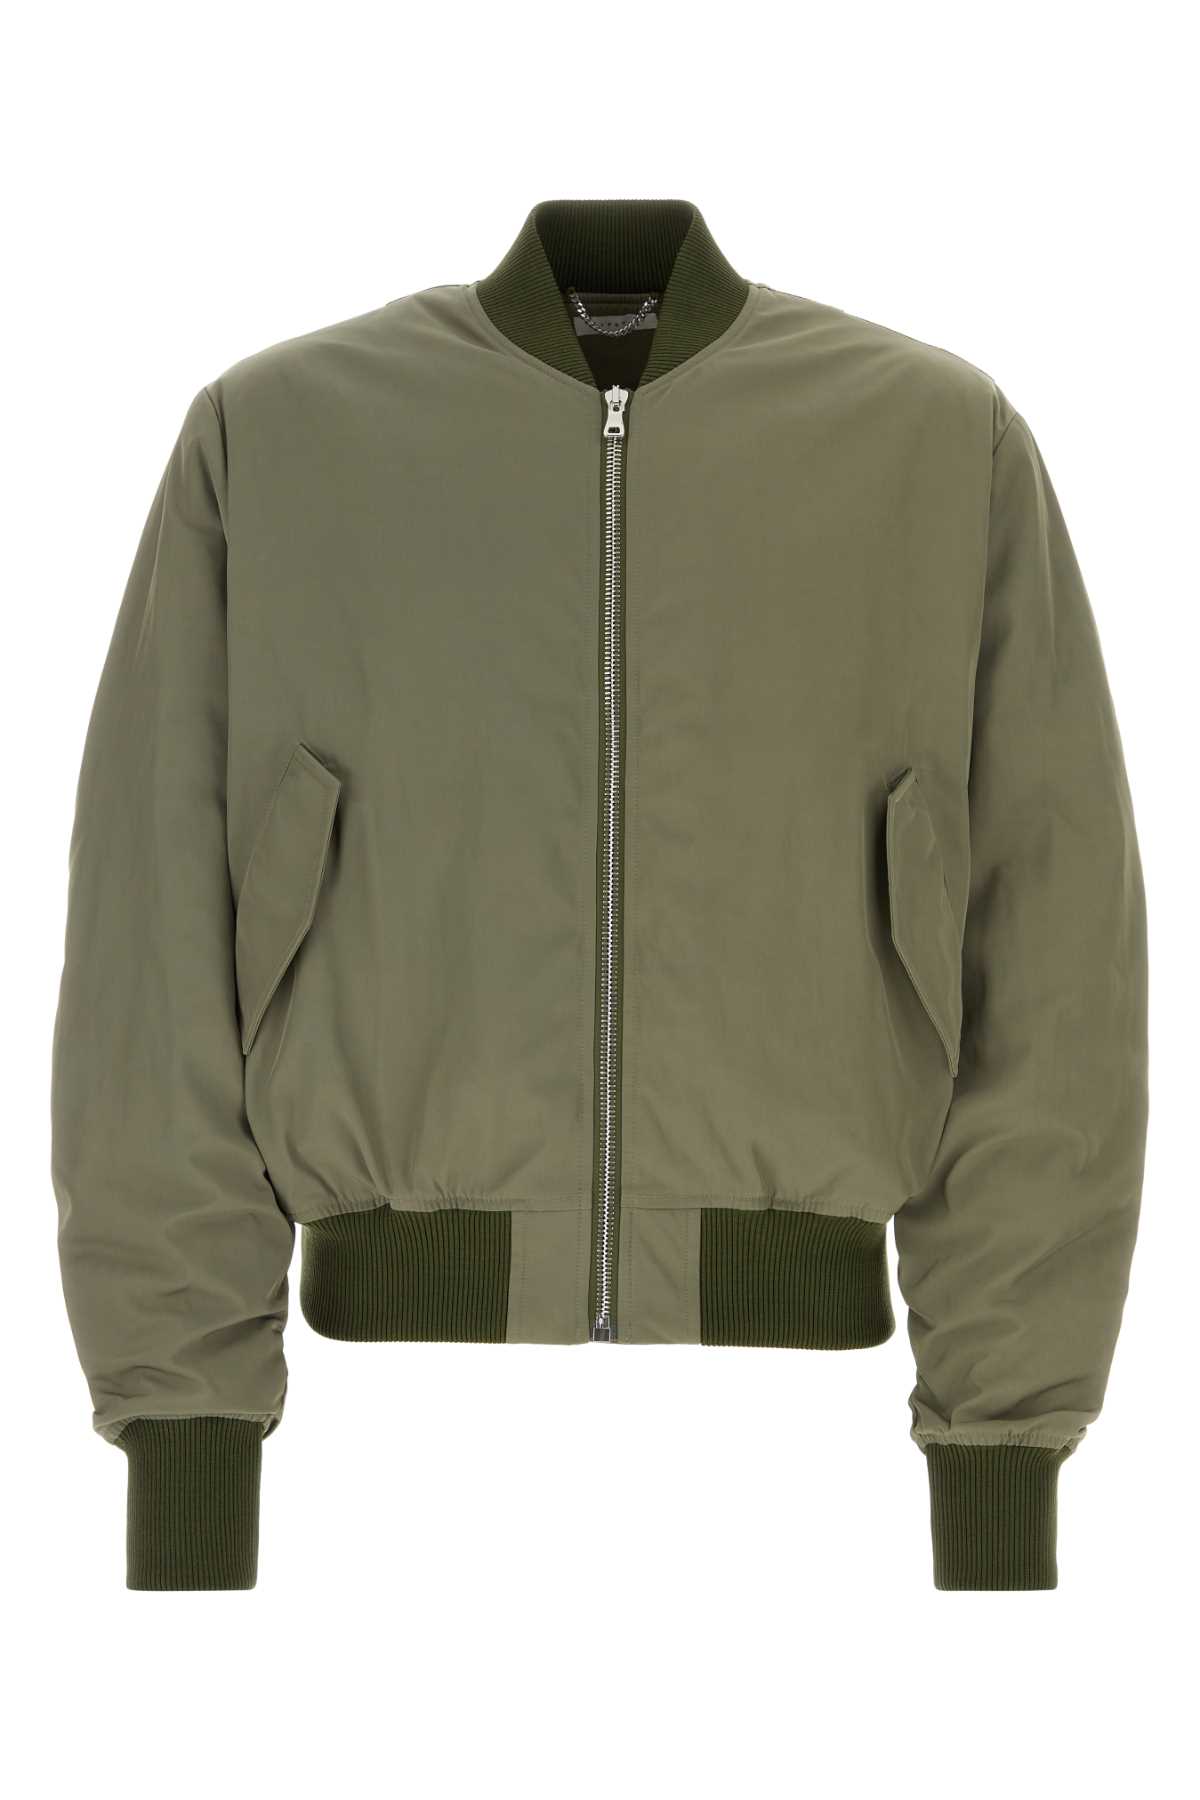 Army Green Polyester Bomber Jacket